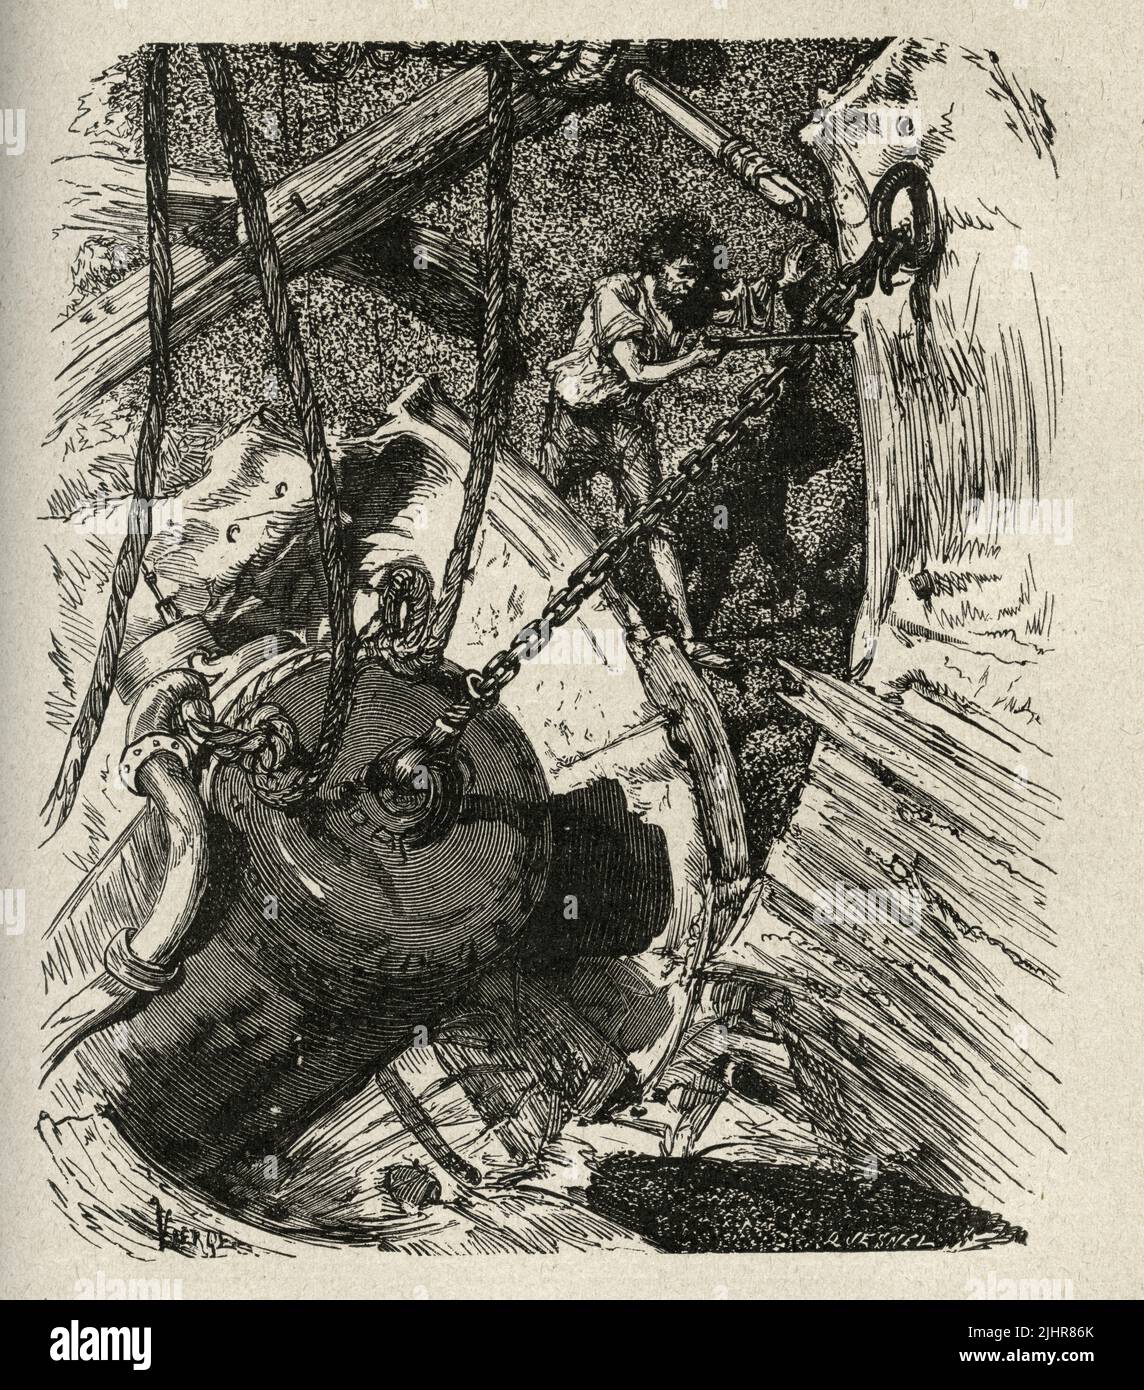 Earnest, but troubled with no impulses but what were useful to his work, he took a final glance at the hoisting-tackle, then seized a file and began to saw with it through the chain which held the whole suspended.' Second part, Book II, chapter VIII.  Illustrator: Daniel Vierge. Engraver: Désiré Quesnel. Illustration from a set of 150 woodcuts published in the Volume XI of Victor Hugo's 'Oeuvres Complètes' including 'Les Travailleurs de la Mer' ('Toilers of the Sea') - written in 1866. Book published in 1906 by the Société d'éditions Littéraires et Artistiques, Librairie Paul Ollendorff. Stock Photo